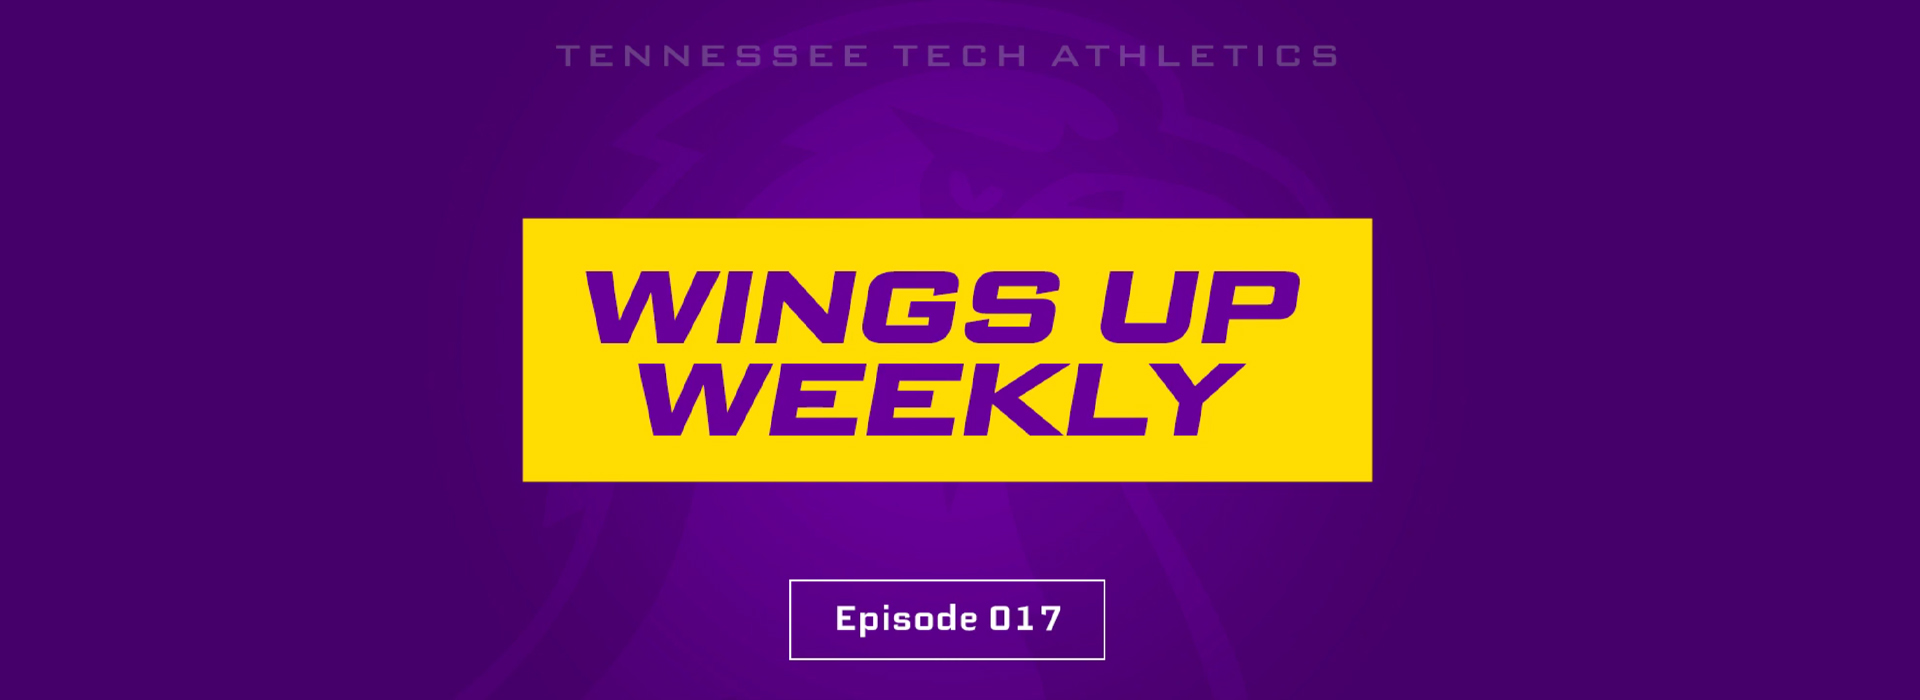 Wings Up Weekly: Episode 017 - featuring Director of Athletics Mark Wilson